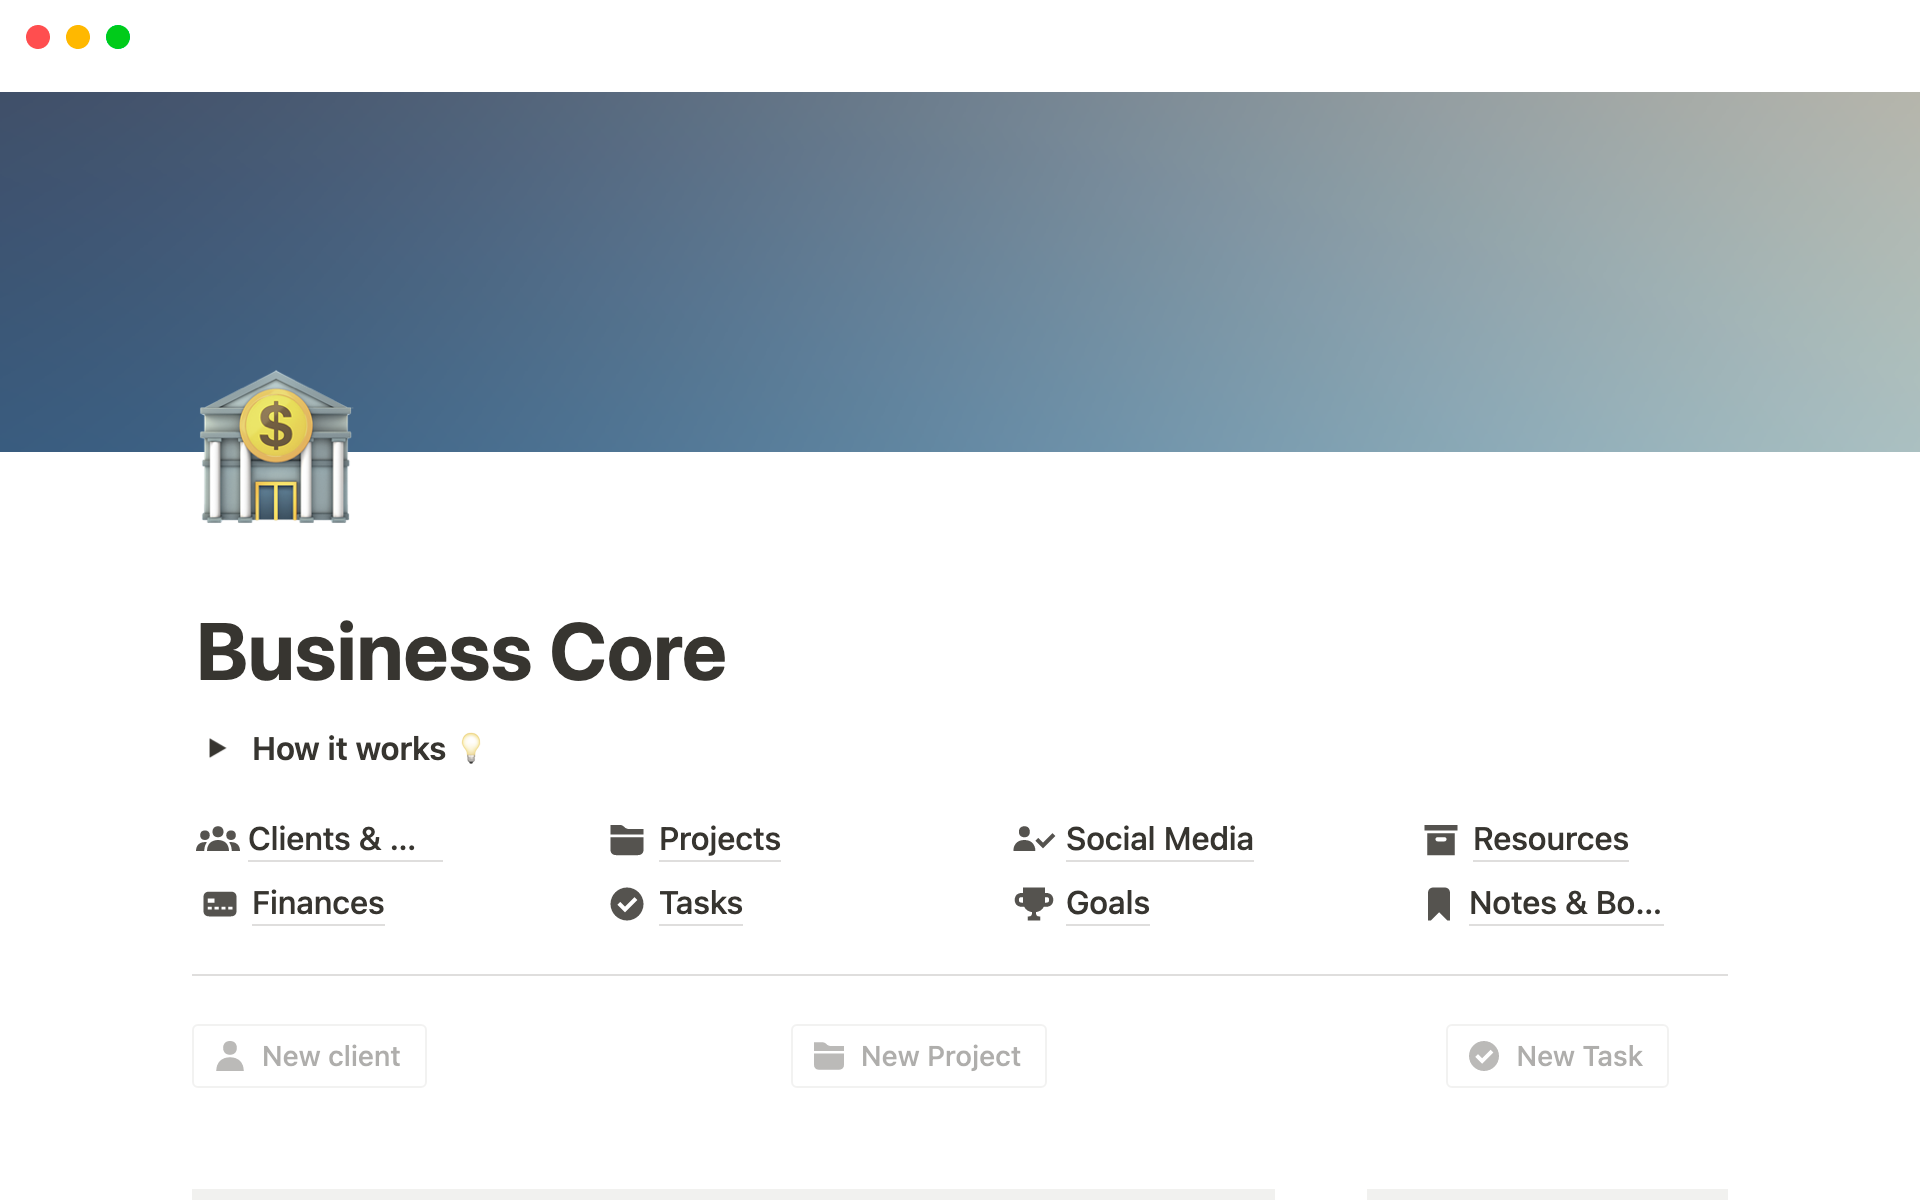 Business Core is the ultimate all-in-one Notion template that simplifies and streamlines business management, from clients and projects to finances, resources, and more.